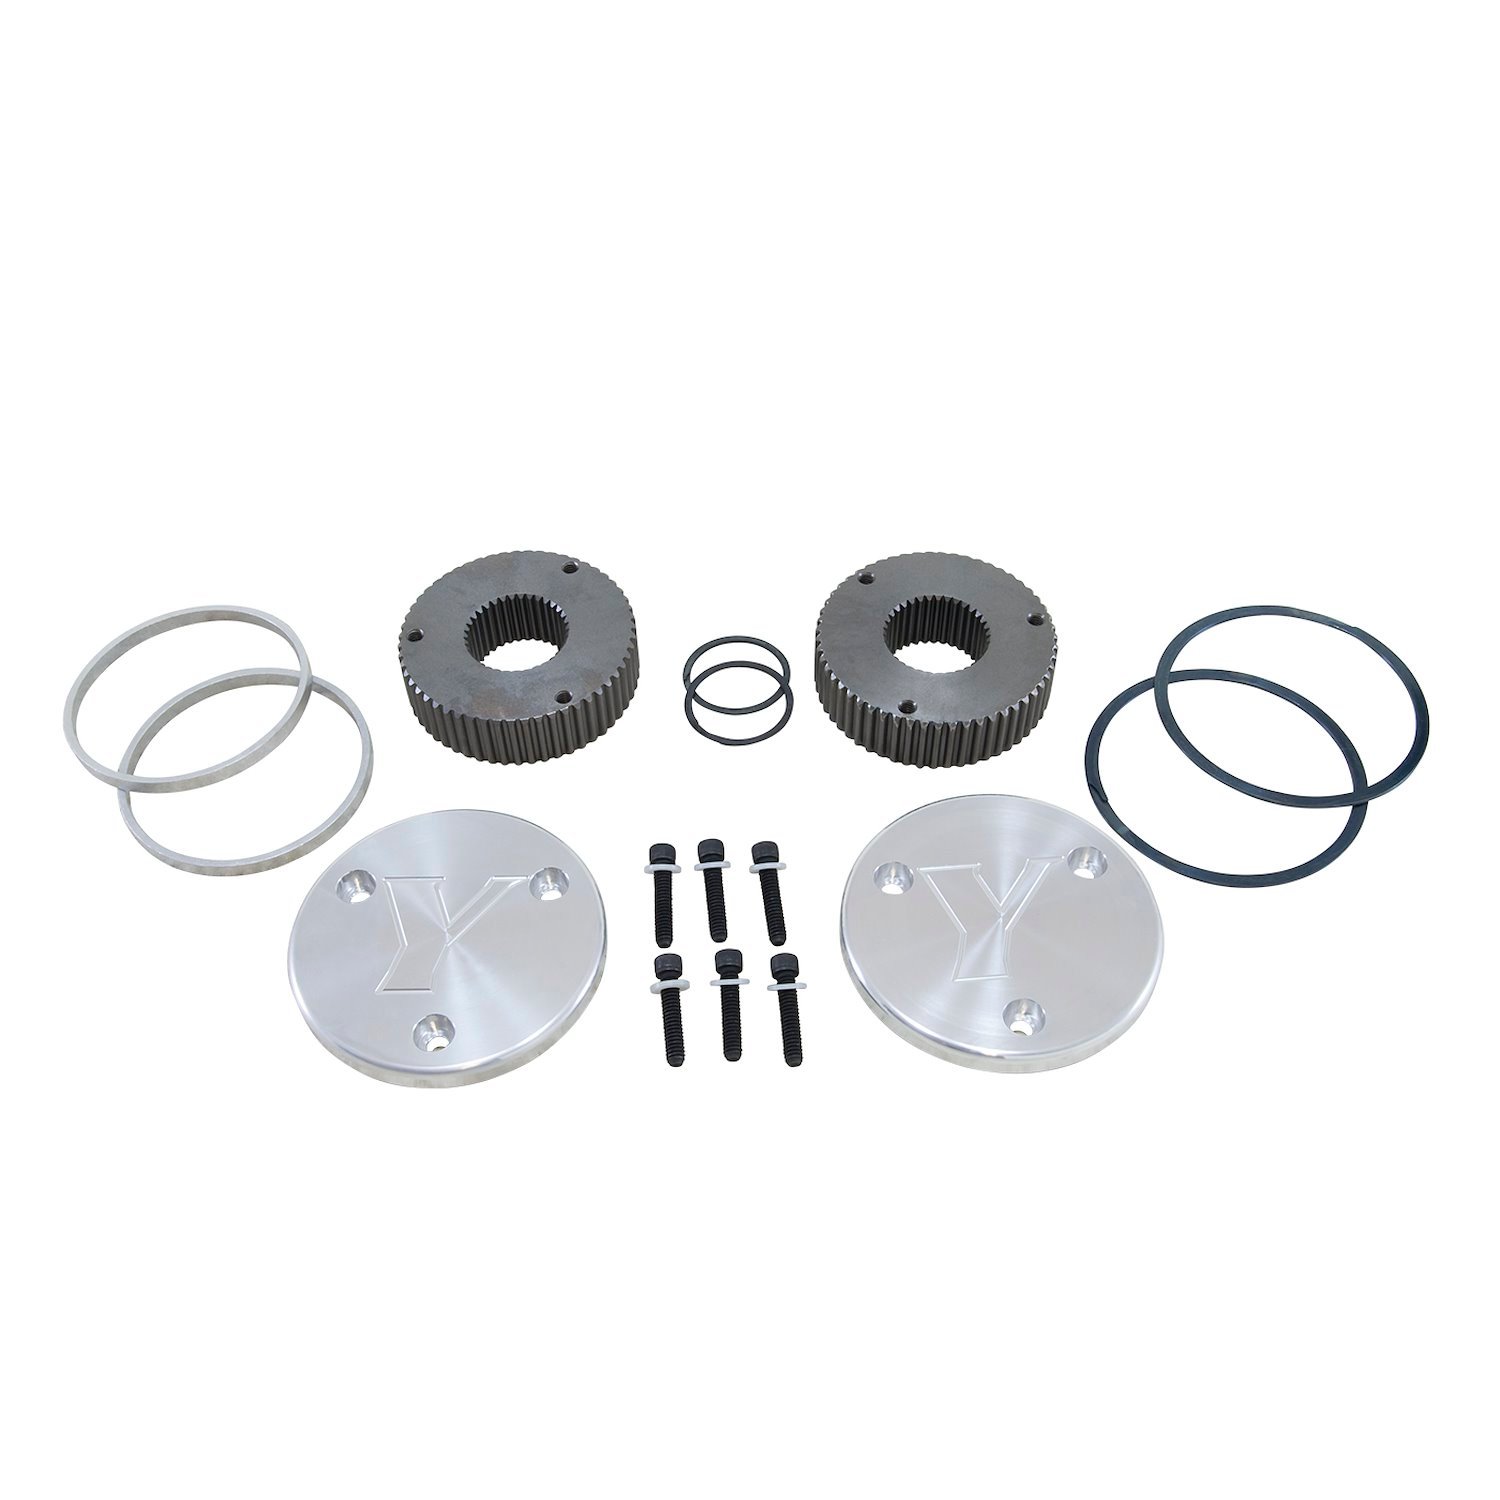 Hardcore Drive Flange Kit Fits Dana Spicer 60 with 35-Spline Outer Axles Includes: